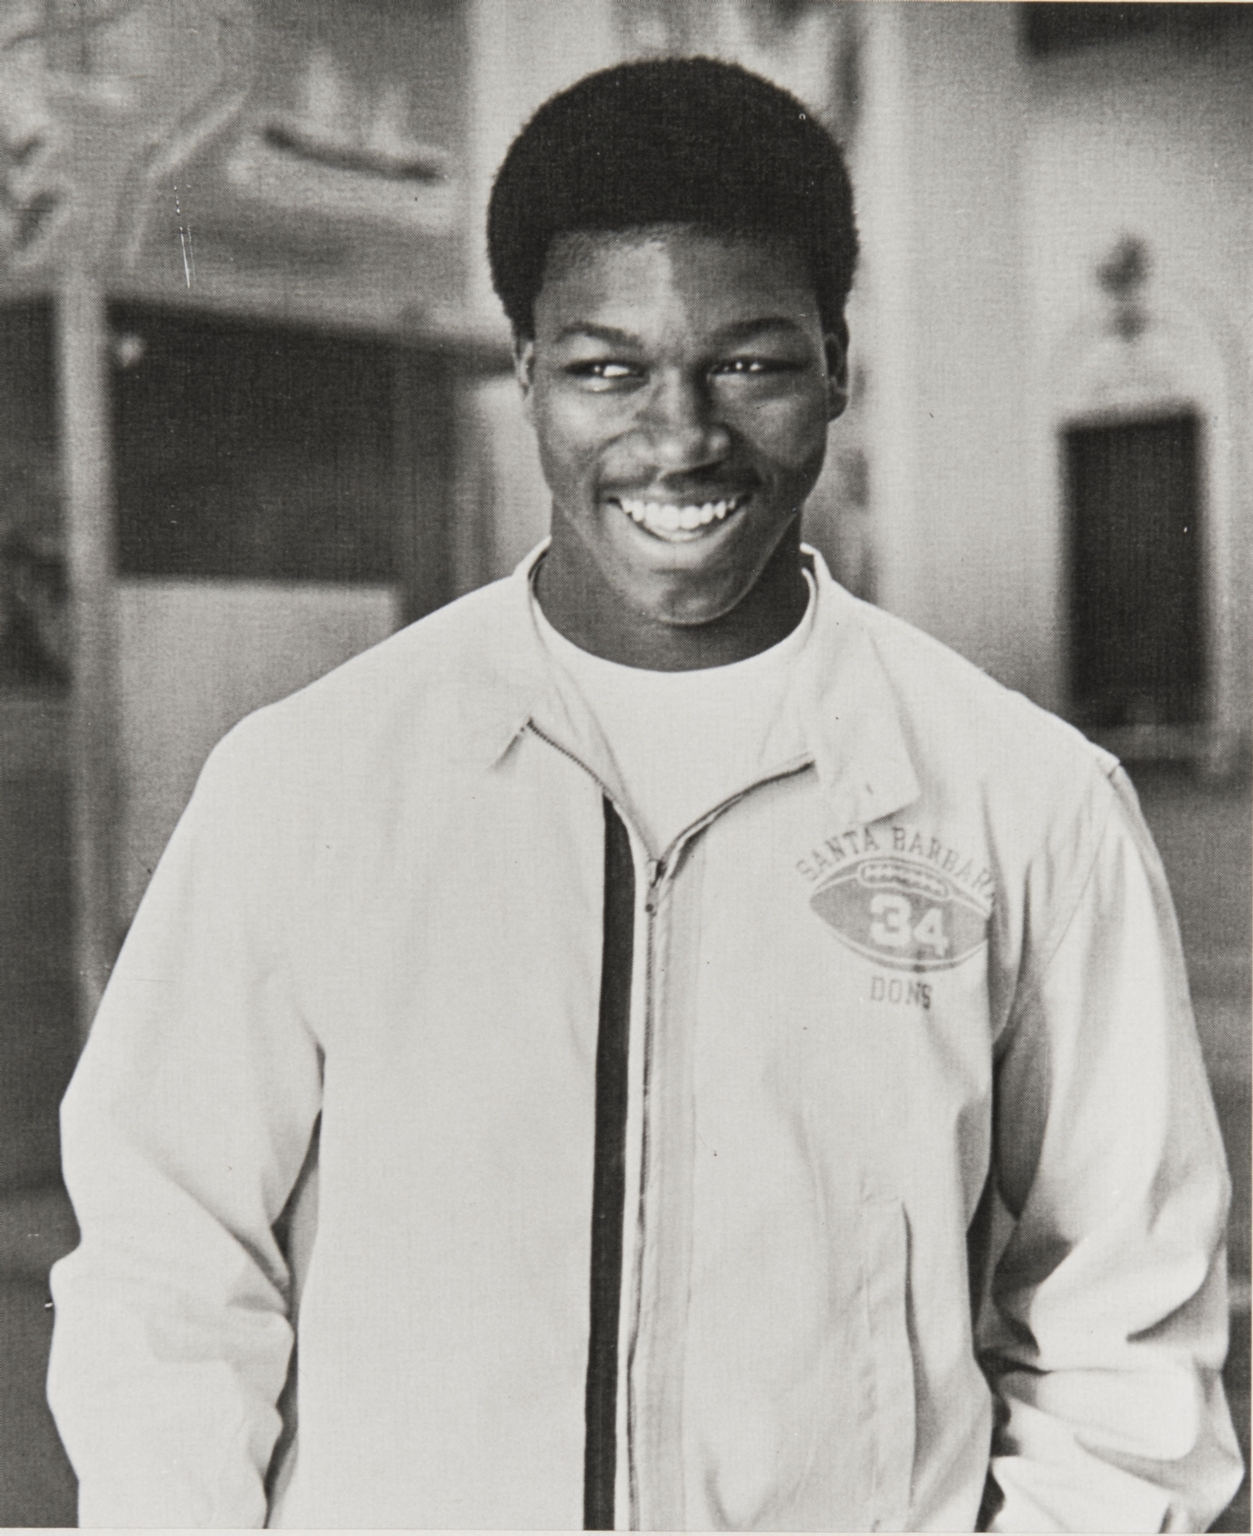 Sam Cunningham, Outstanding Senior Boy, Class of 1969 : Sam was chairman of the Athletic Committee, a member of Key Club and United Black Students and excelled in shot-put as well as football. He won All-American honors from Parade and Scholastic magazines. He attended the University of Southern California and as Sam "Barn" played football with the New England Patriots. (His brother Randall, Class of 1980, plays football for the Philadelphia Eagles.)